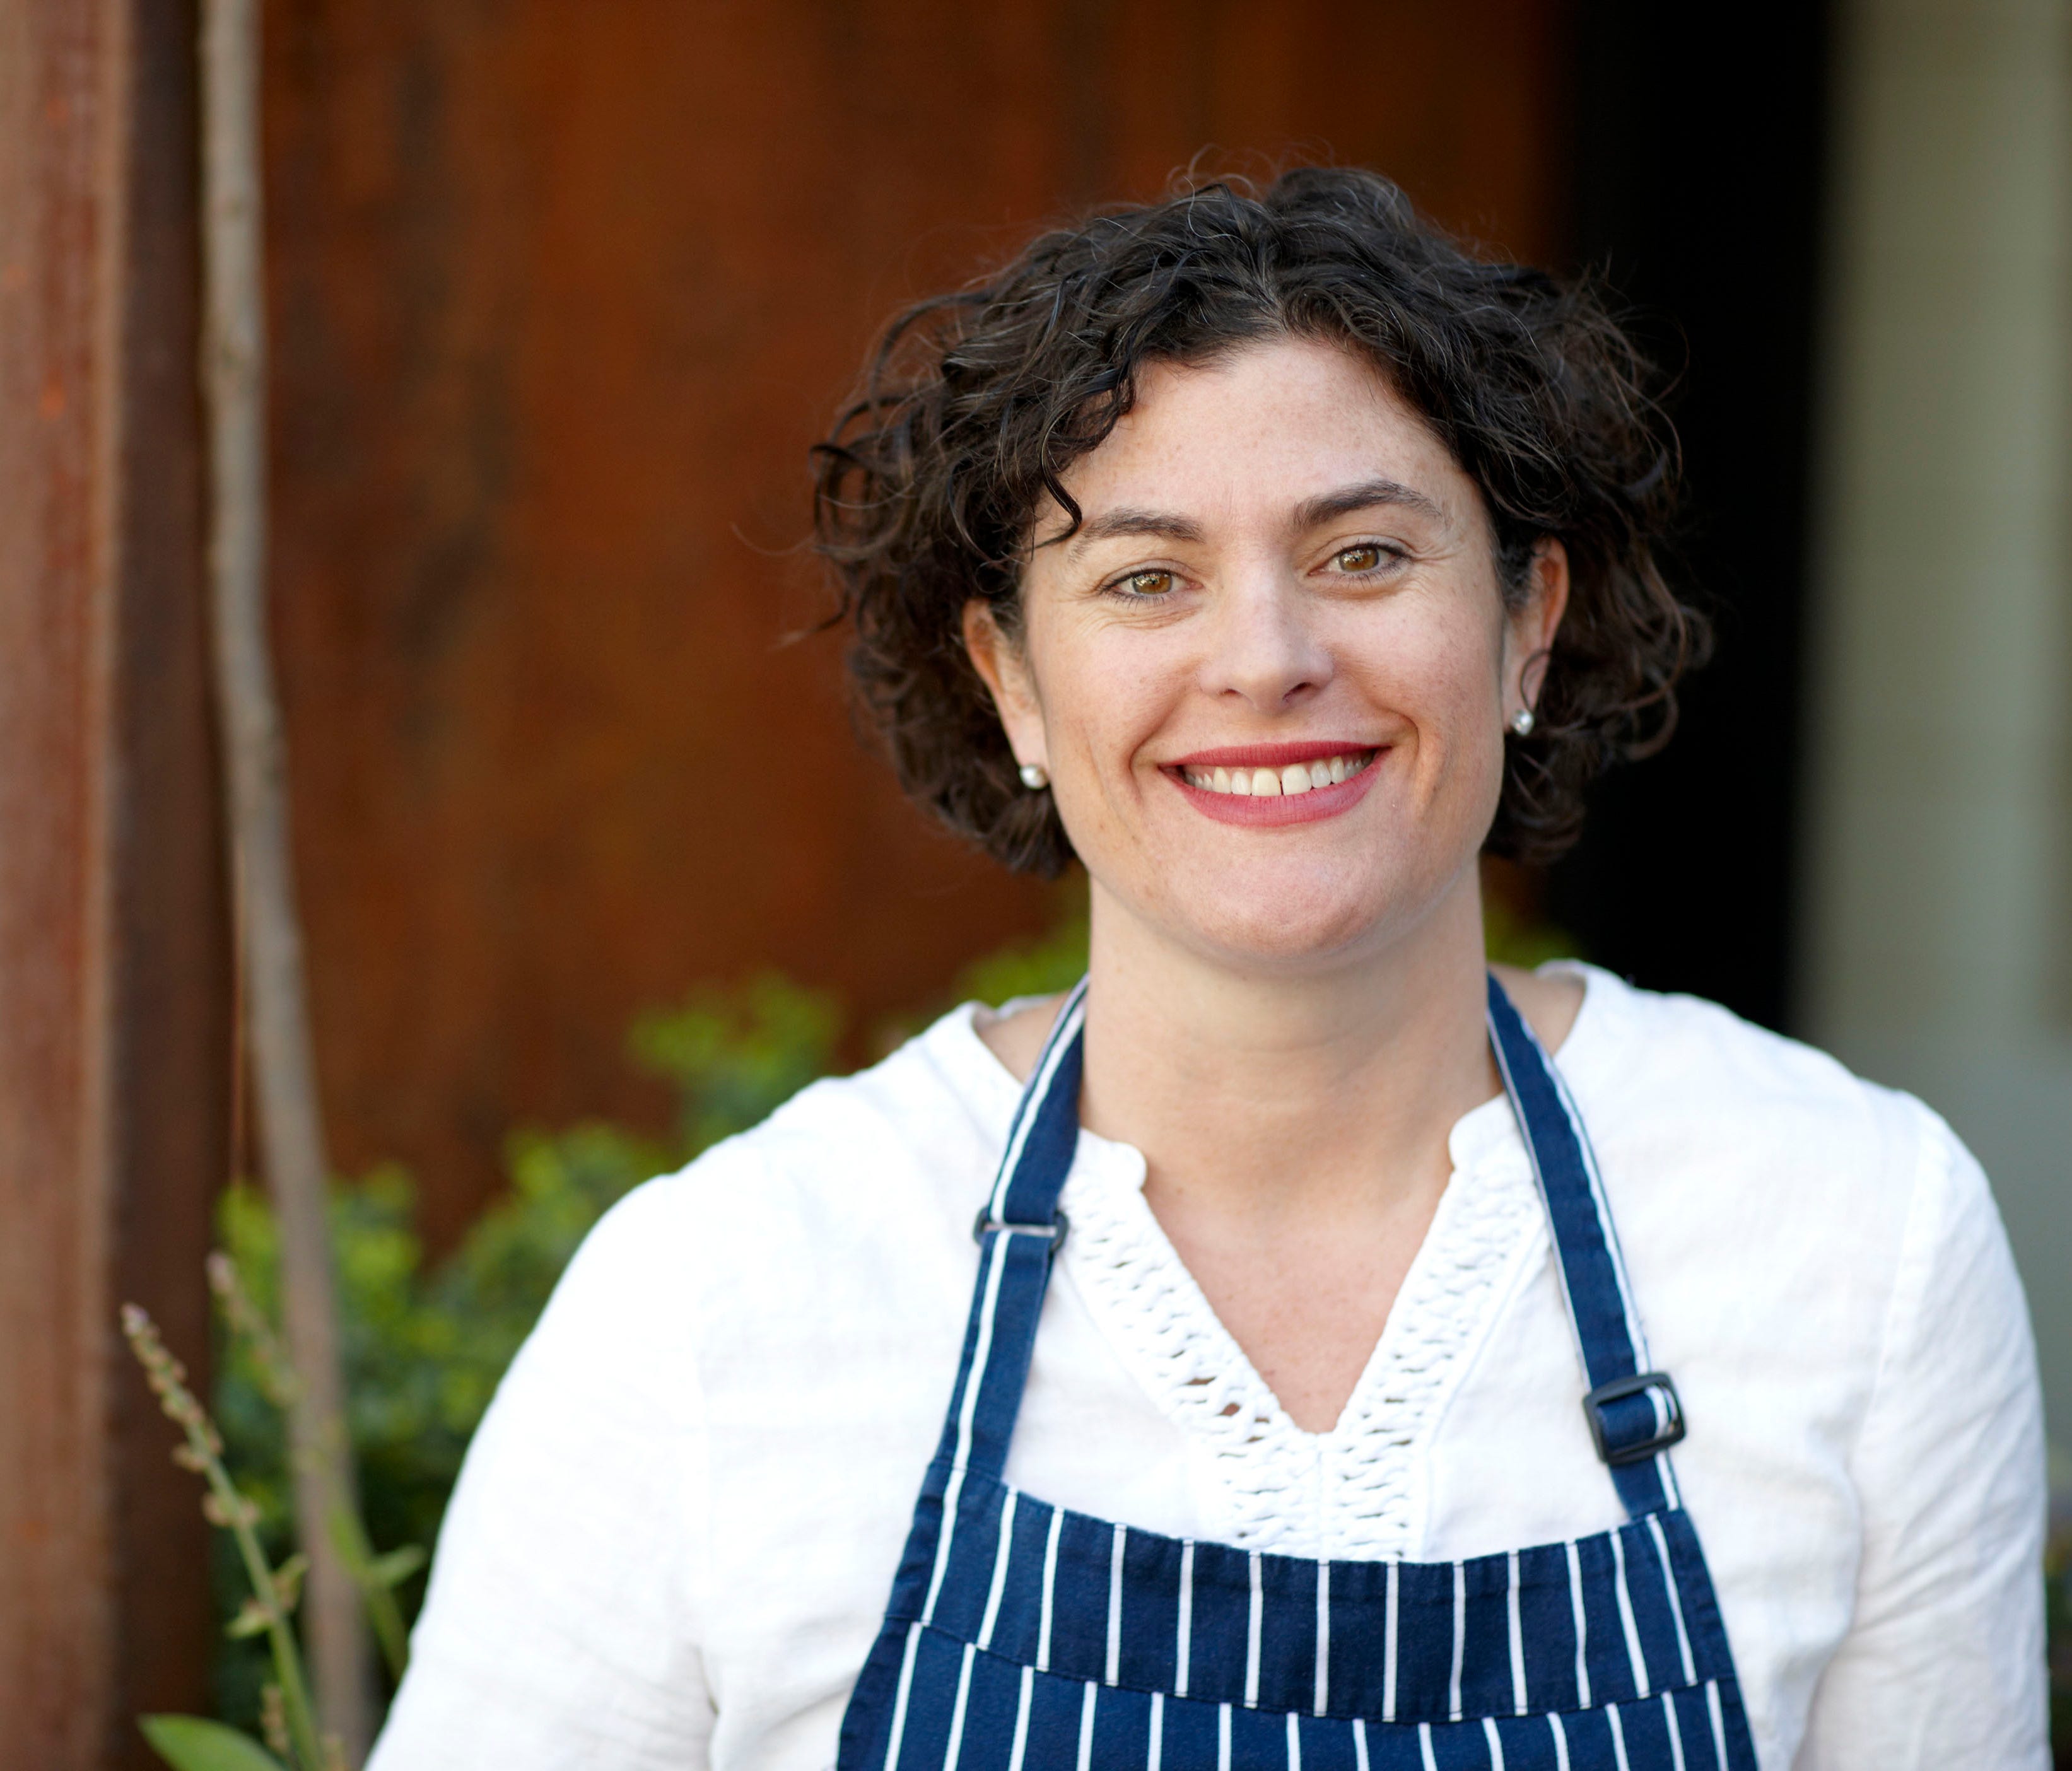 Renee Erickson is the chef and owner of Seattle restaurant group Sea Creatures, which includes The Walrus and The Carpenter, The Whale Wins, Barnacle, Bateau, Bar Melusine, General Porpoise and Rana e Rospo.